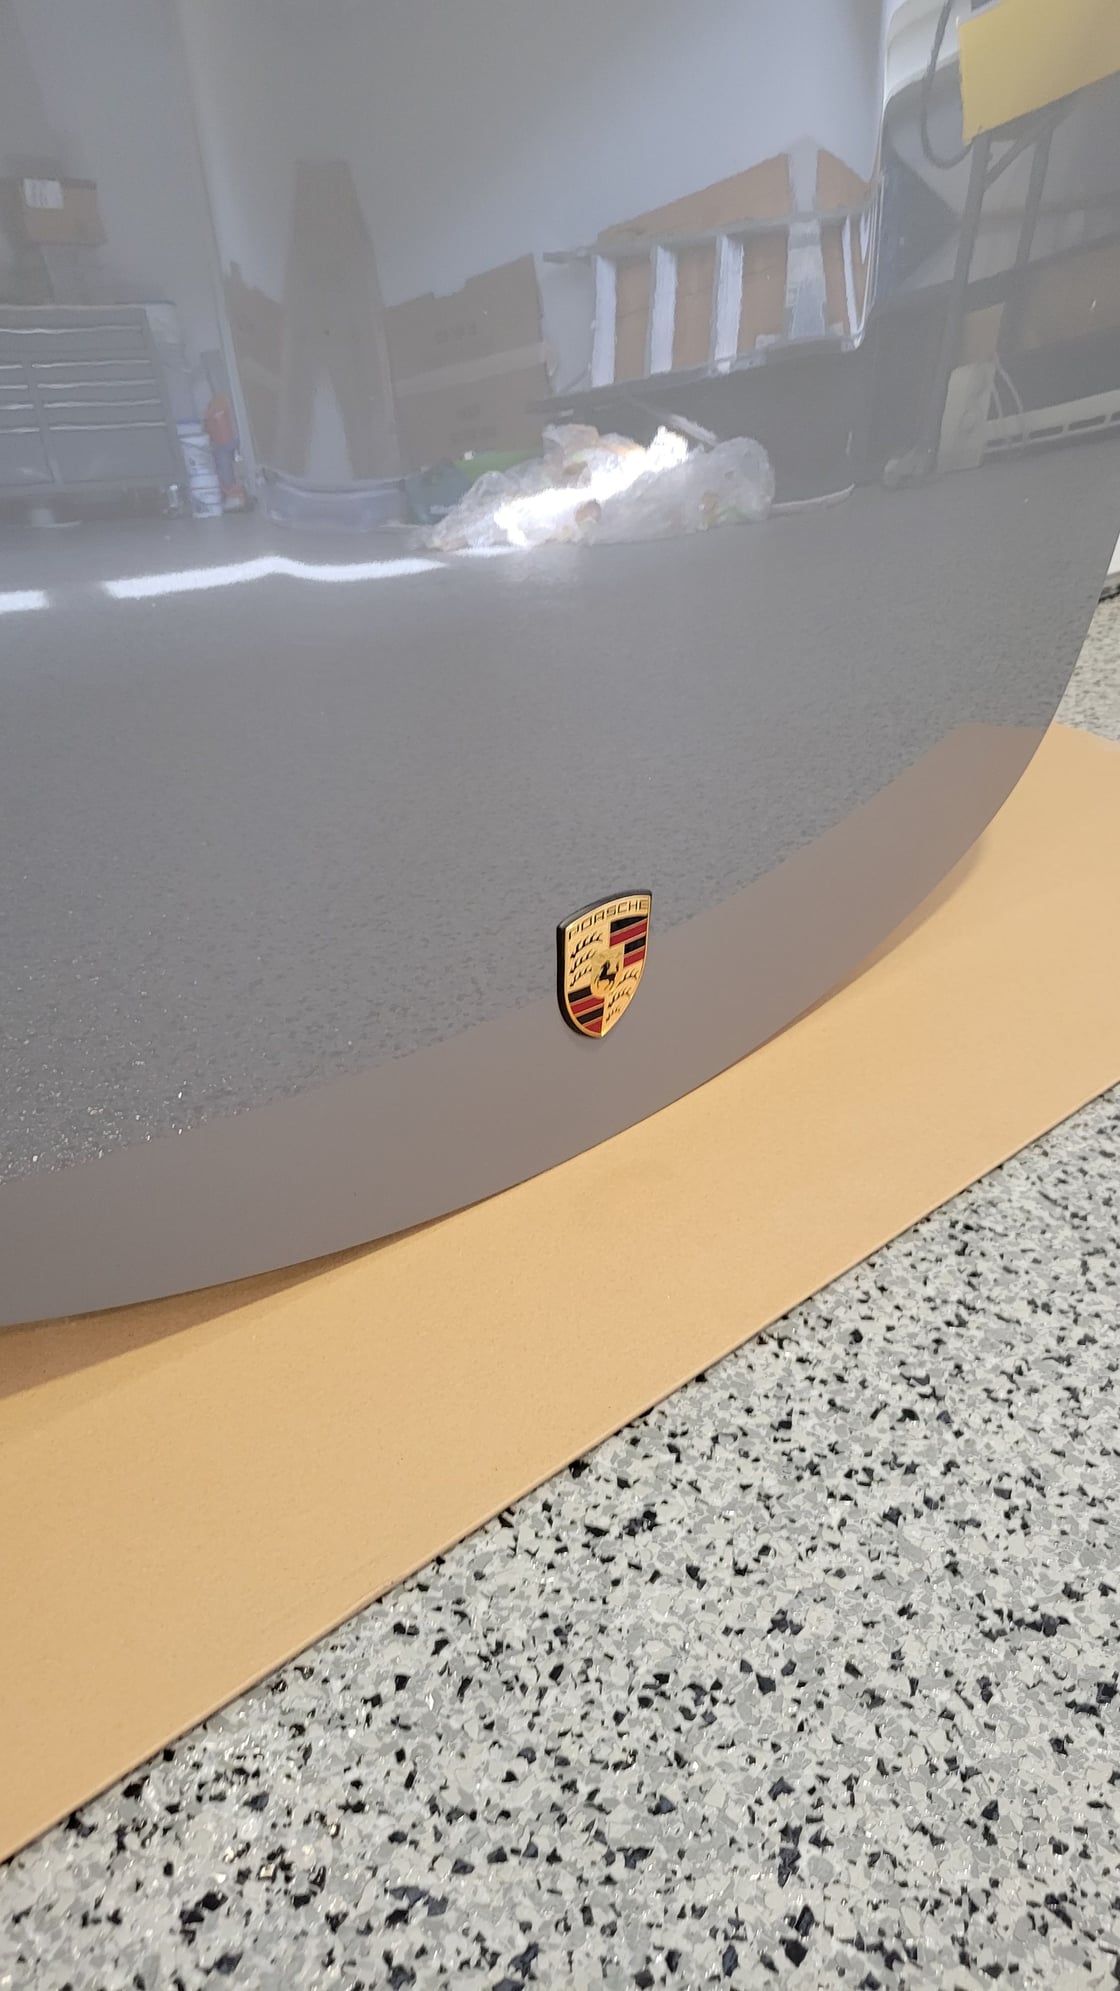 Exterior Body Parts - Factory OEM 991 911R, Speedster and 991.1 GT3RS Painted Carbon Fiber Hood - Used - 2012 to 2019 Porsche 911 - Orange County, CA 92656, United States